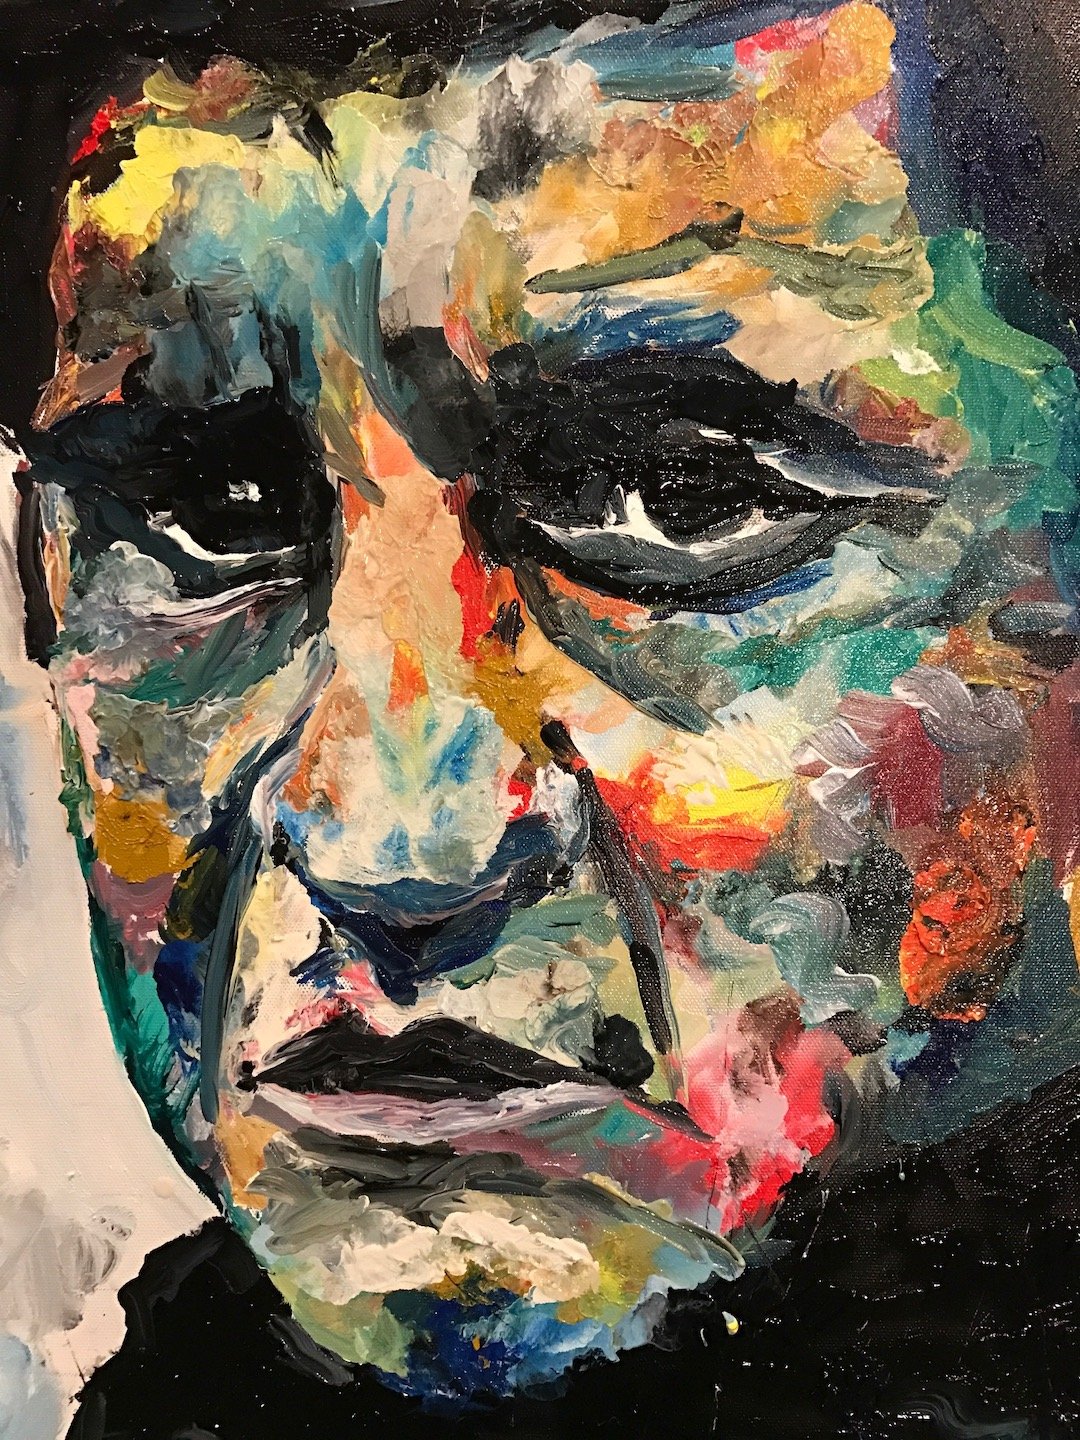    Man in Black in Color  , 24” x 18”, oil on canvas 